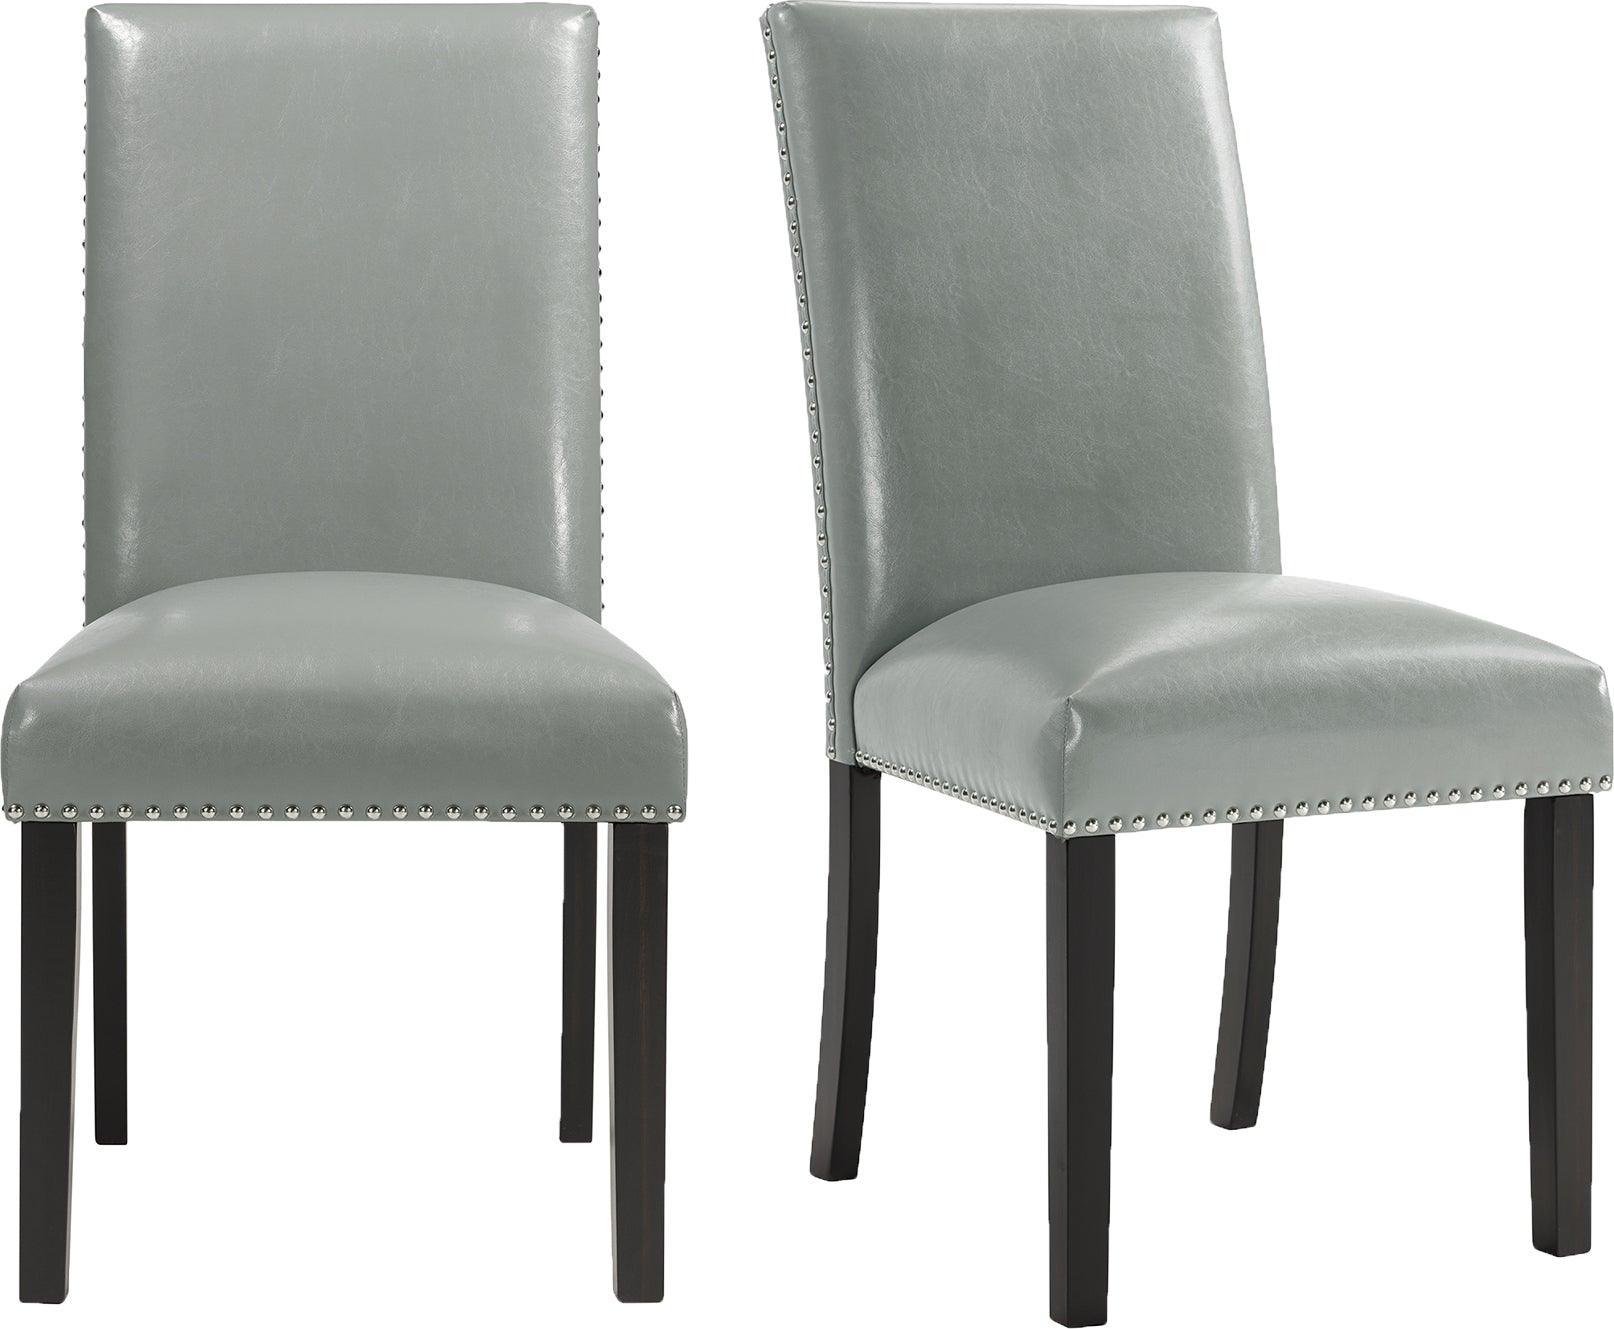 Elements Dining Chairs - Pia Faux Leather Dining Side Chair Set in Grey (Set of 2)